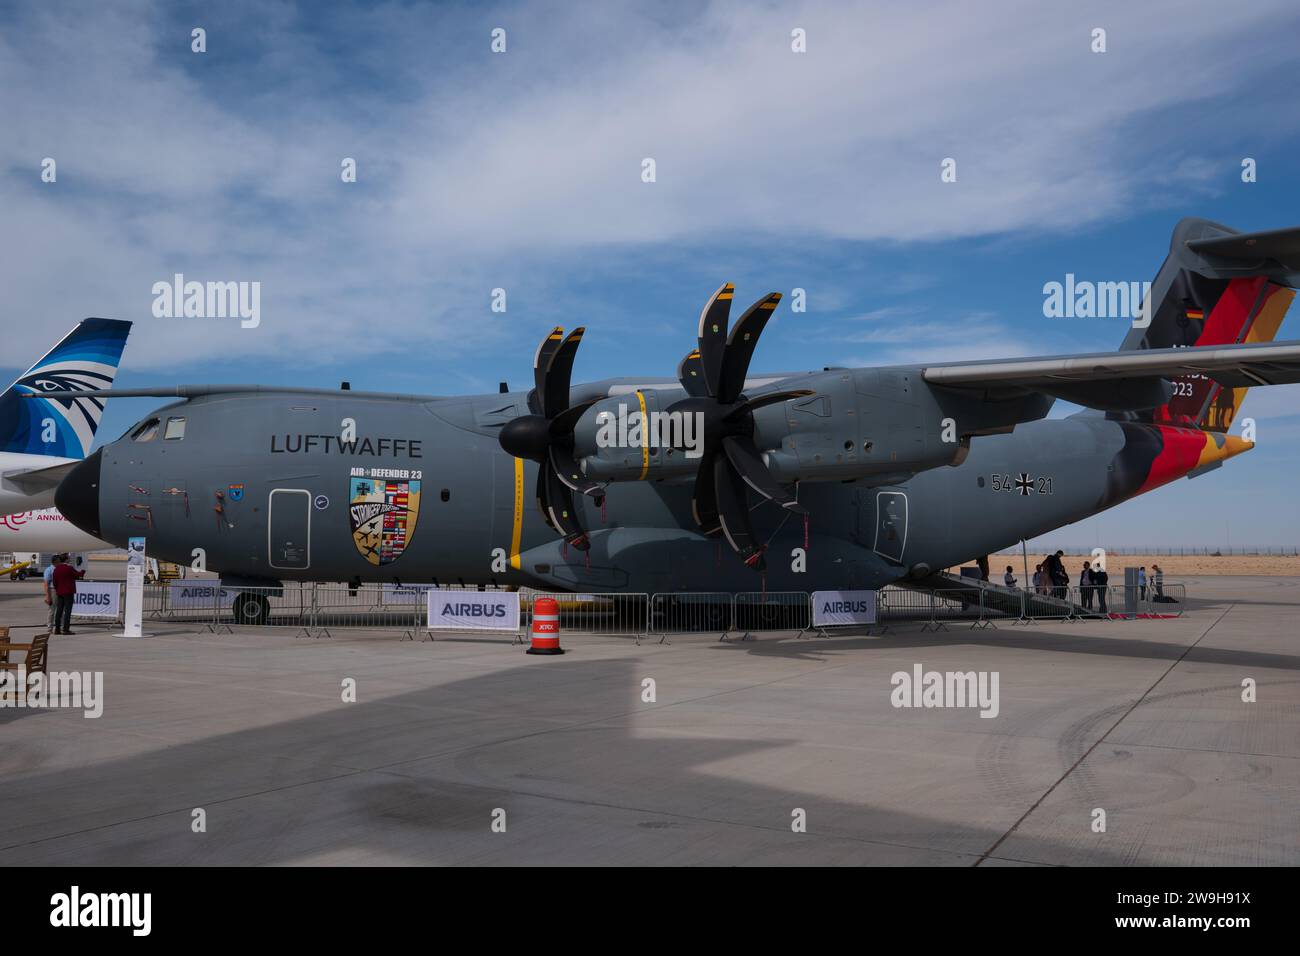 An airbus A400 from the german Luftwaffe with the Air Defender 2023 special markning, german flag on the tail, at an airshow in Dubai. Hazy blue sky. Stock Photo